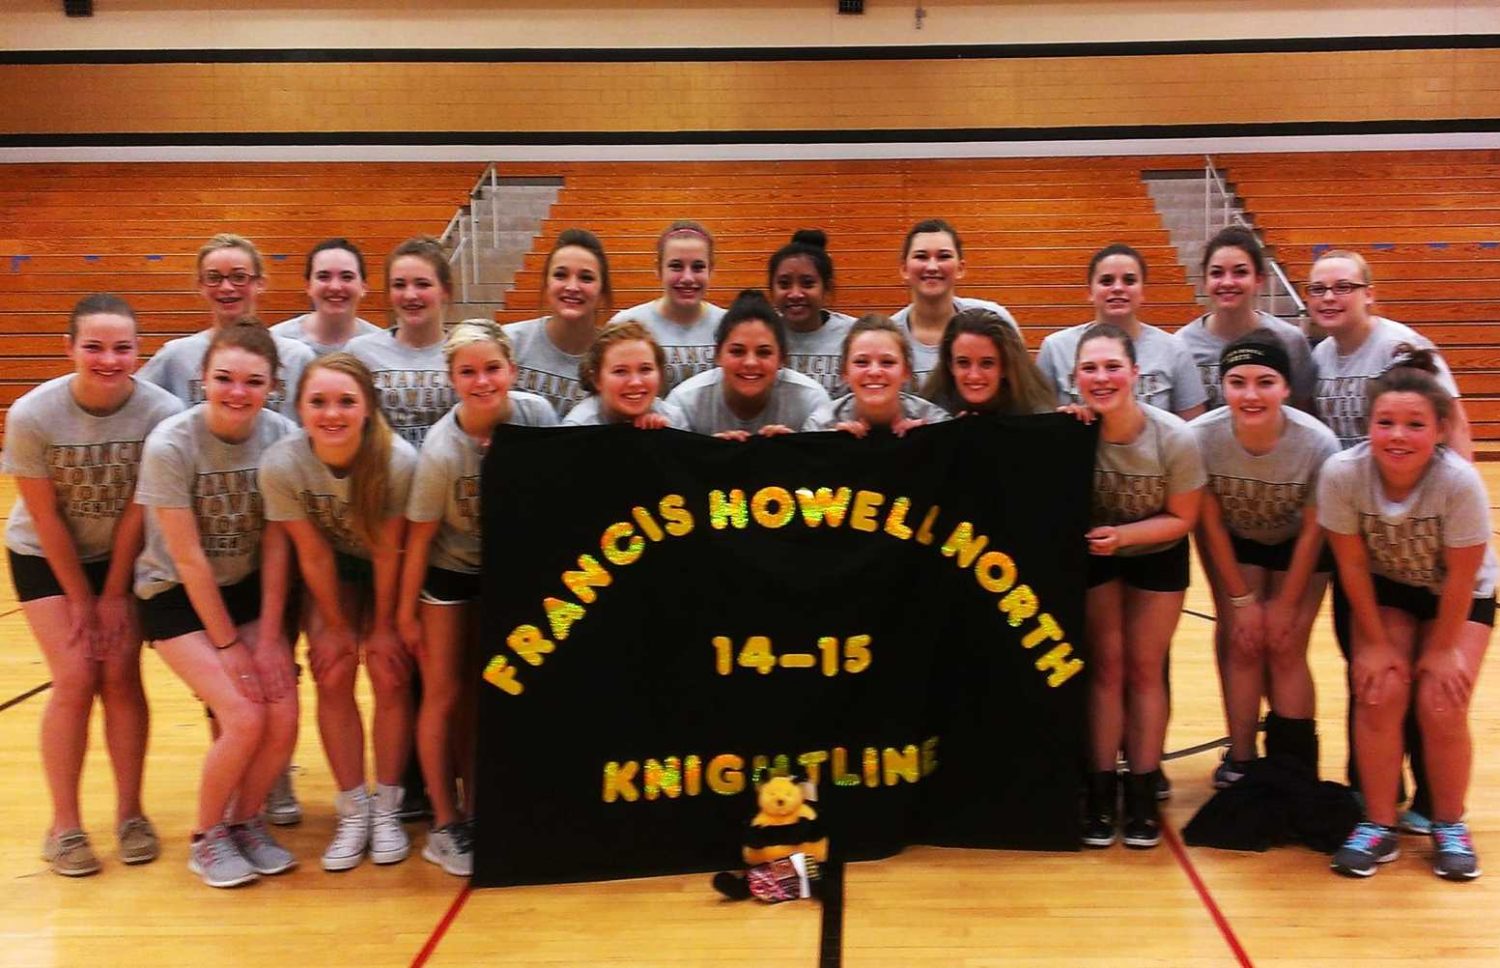 Knightline posing together in the gym.  Another fundraiser Knightline has done this year is mouse racing.